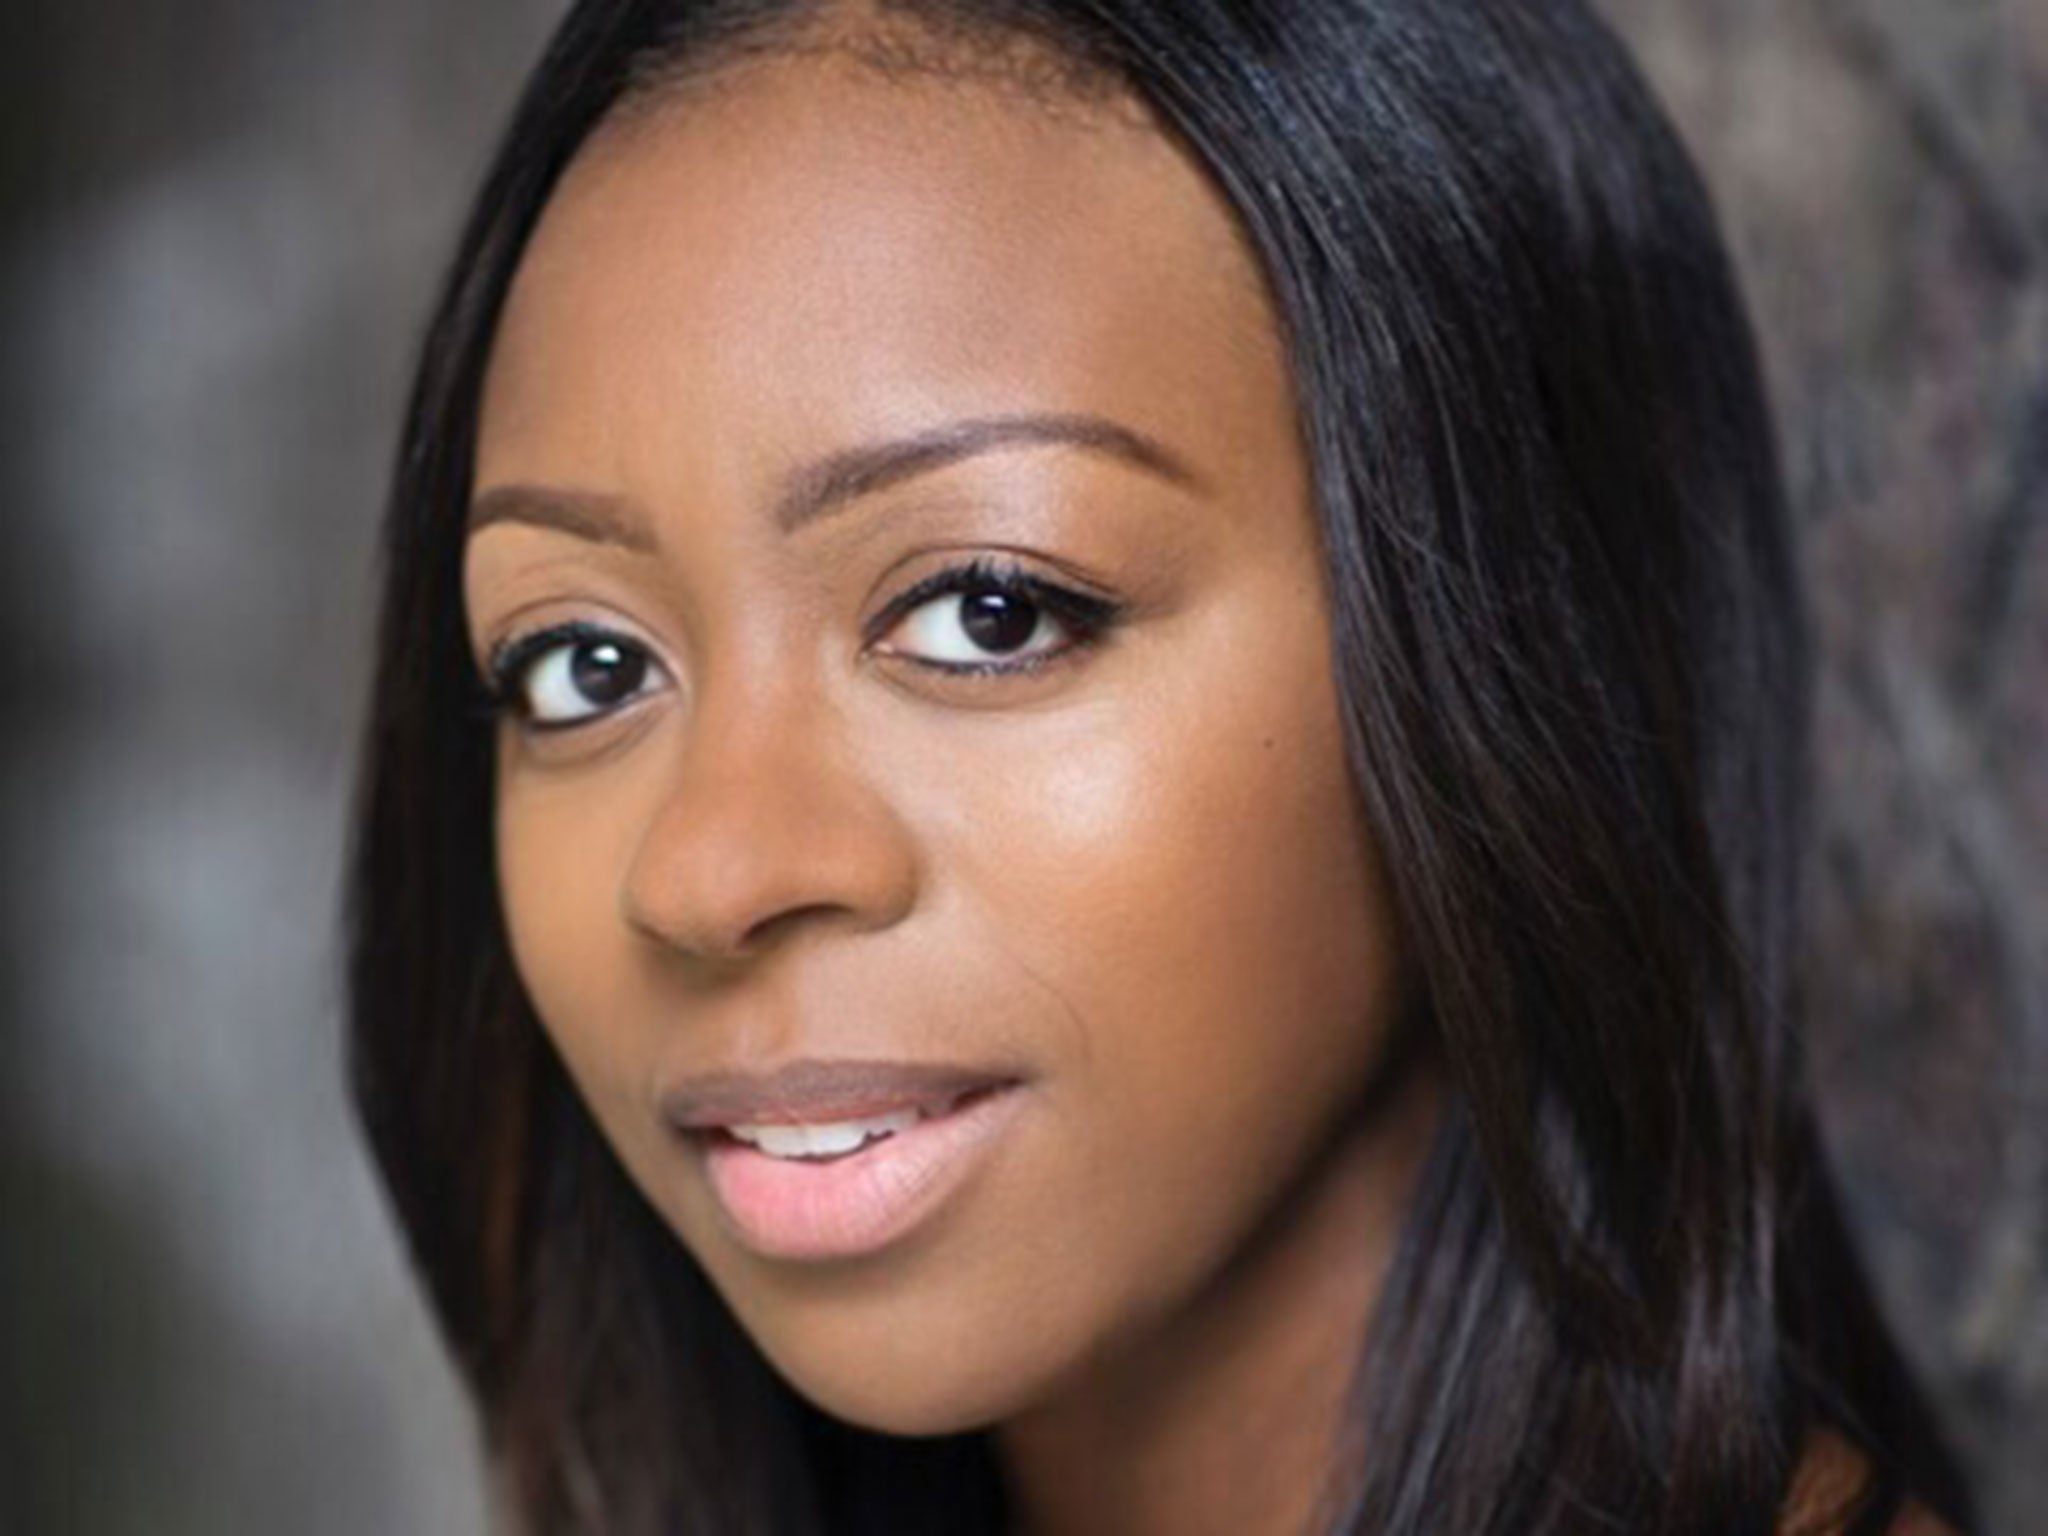 Toni Wallace drives for Uber to fit in around her acting commitments